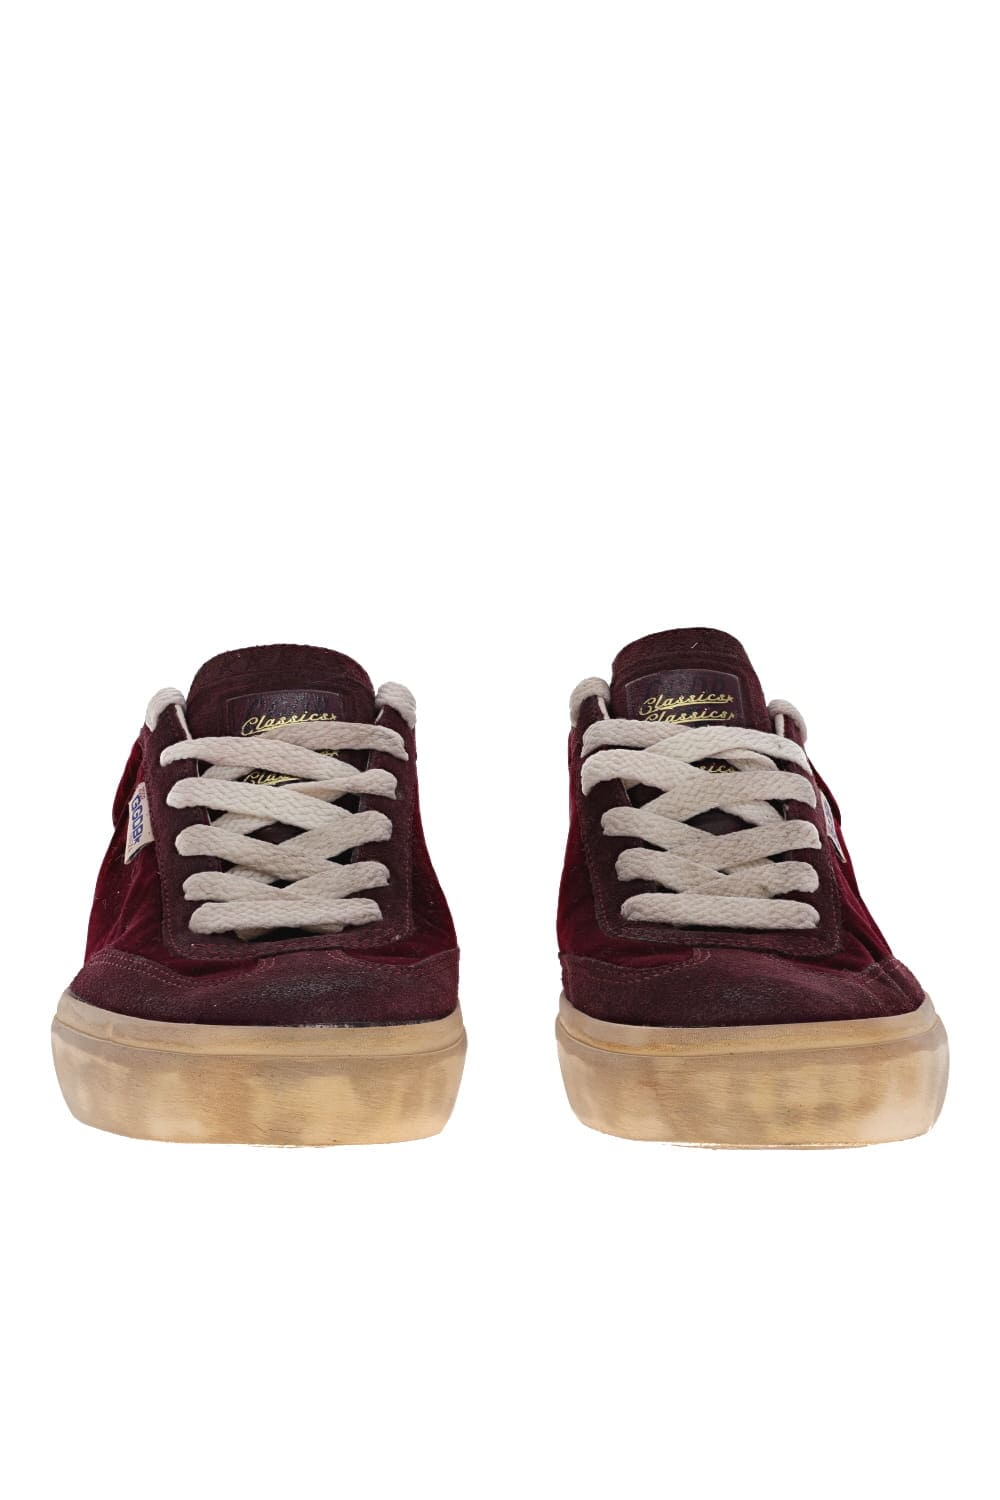 Soul Star Bordeaux Suede Leather Sneakers